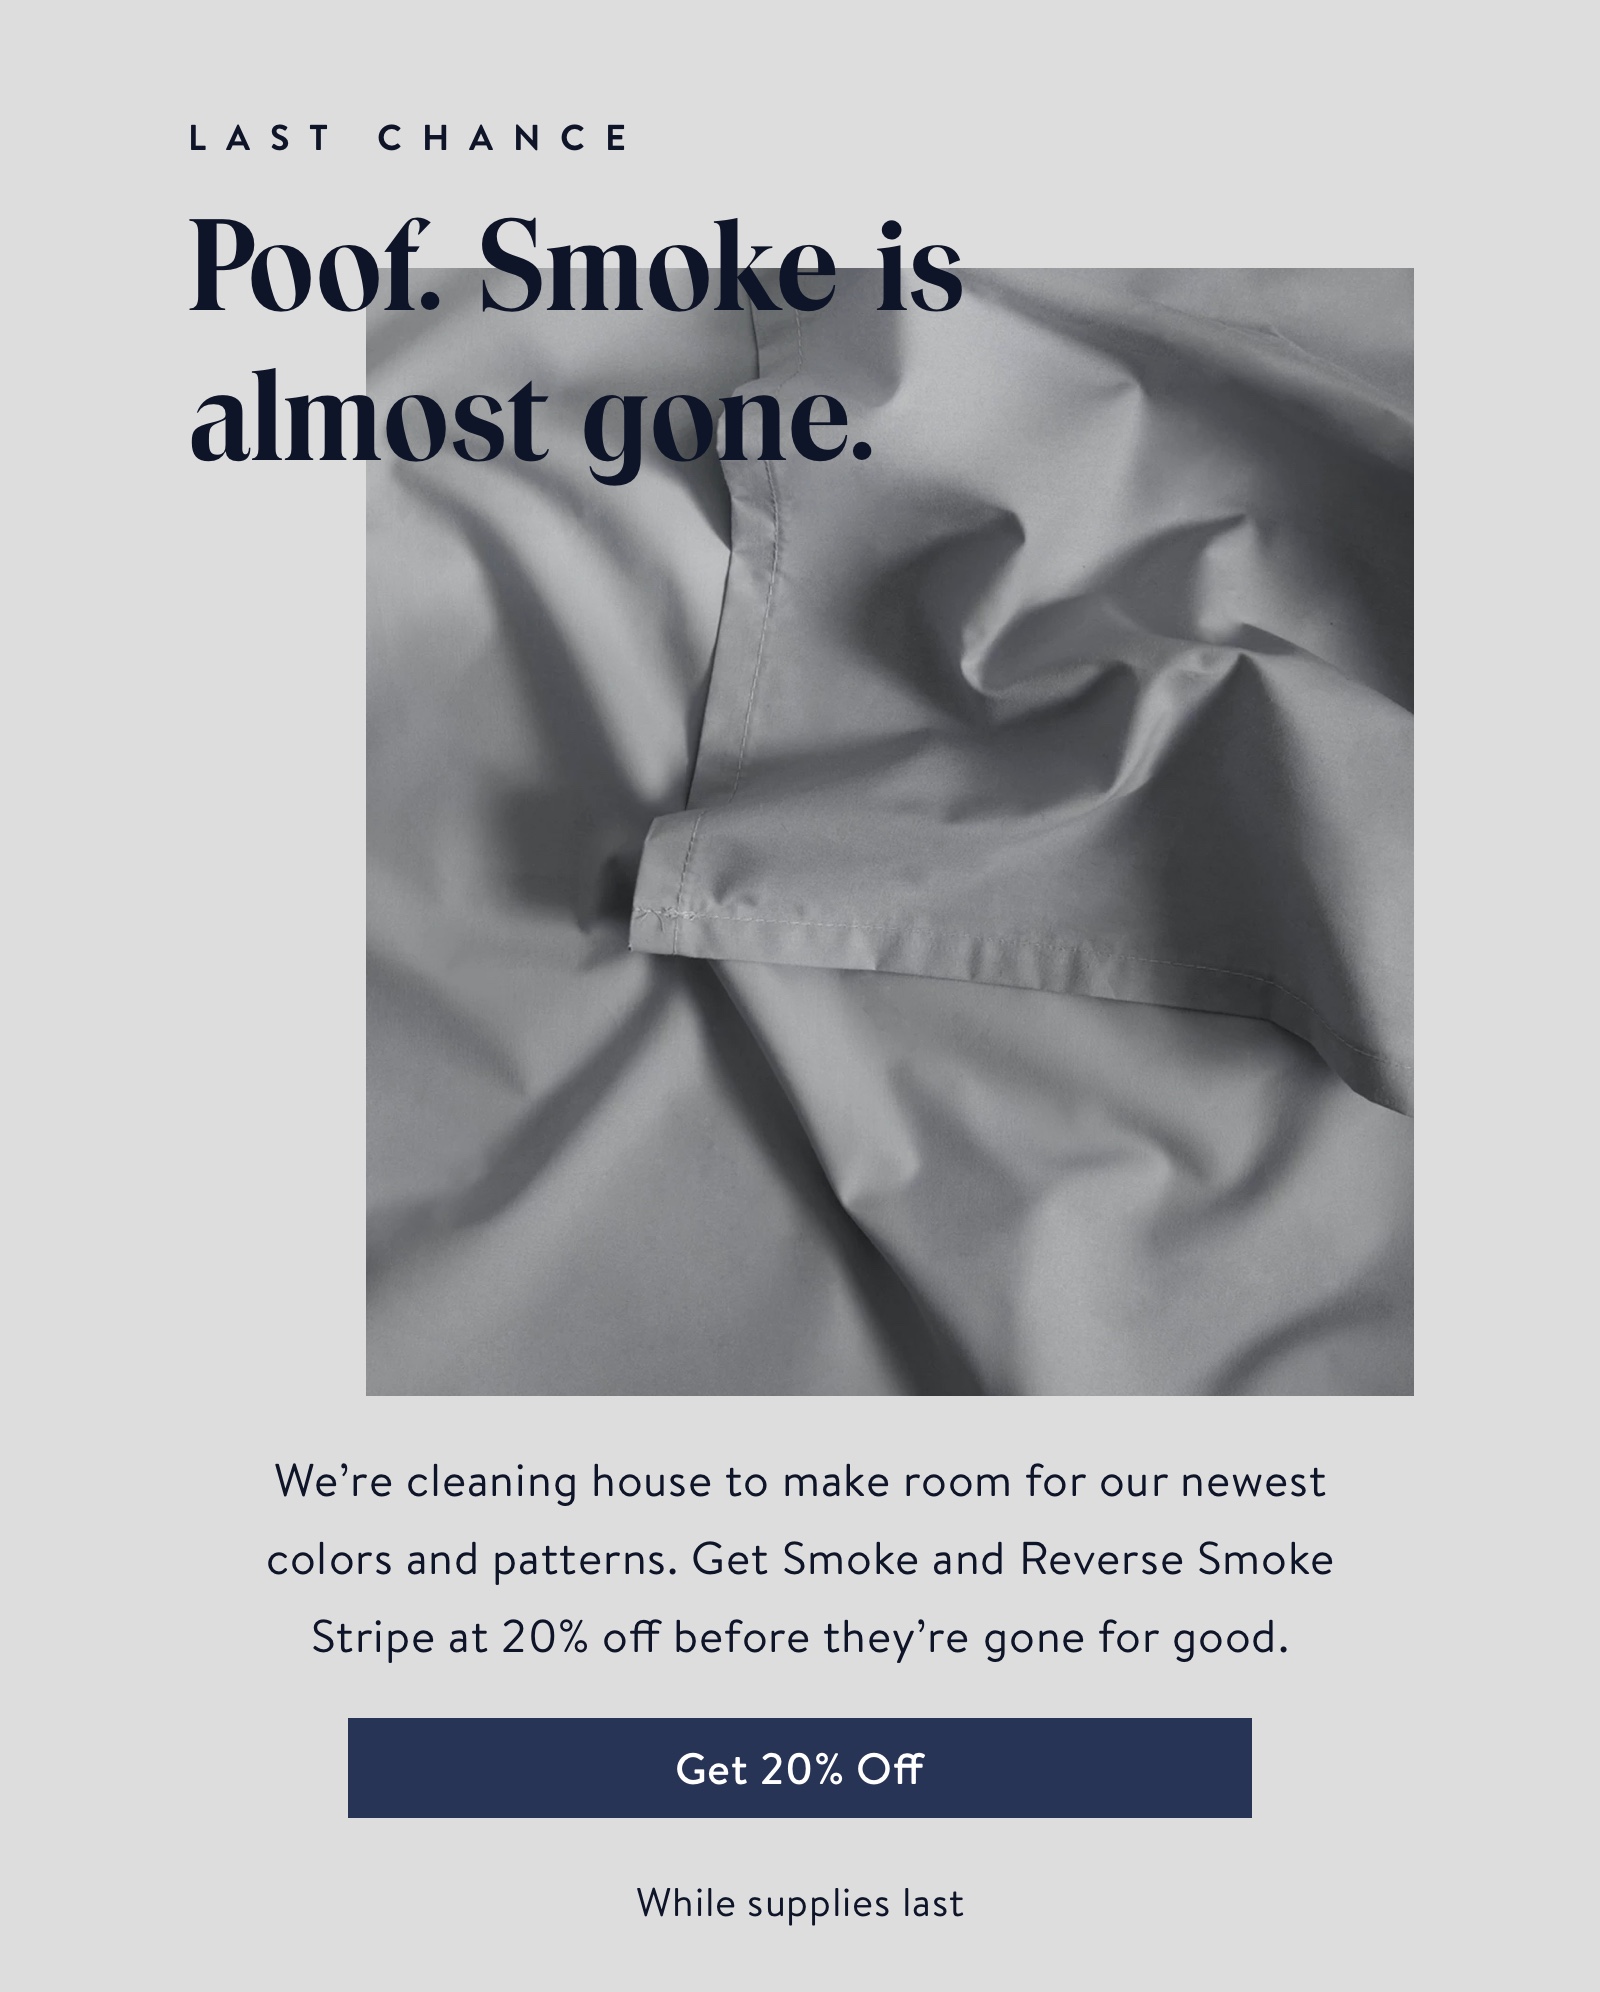 Smoke is almost gone. We''re cleaning house to make room for our newest colors and patterns. Get Smoke and Reserve Smoke Stripe at 20% off before they''re gone for good.